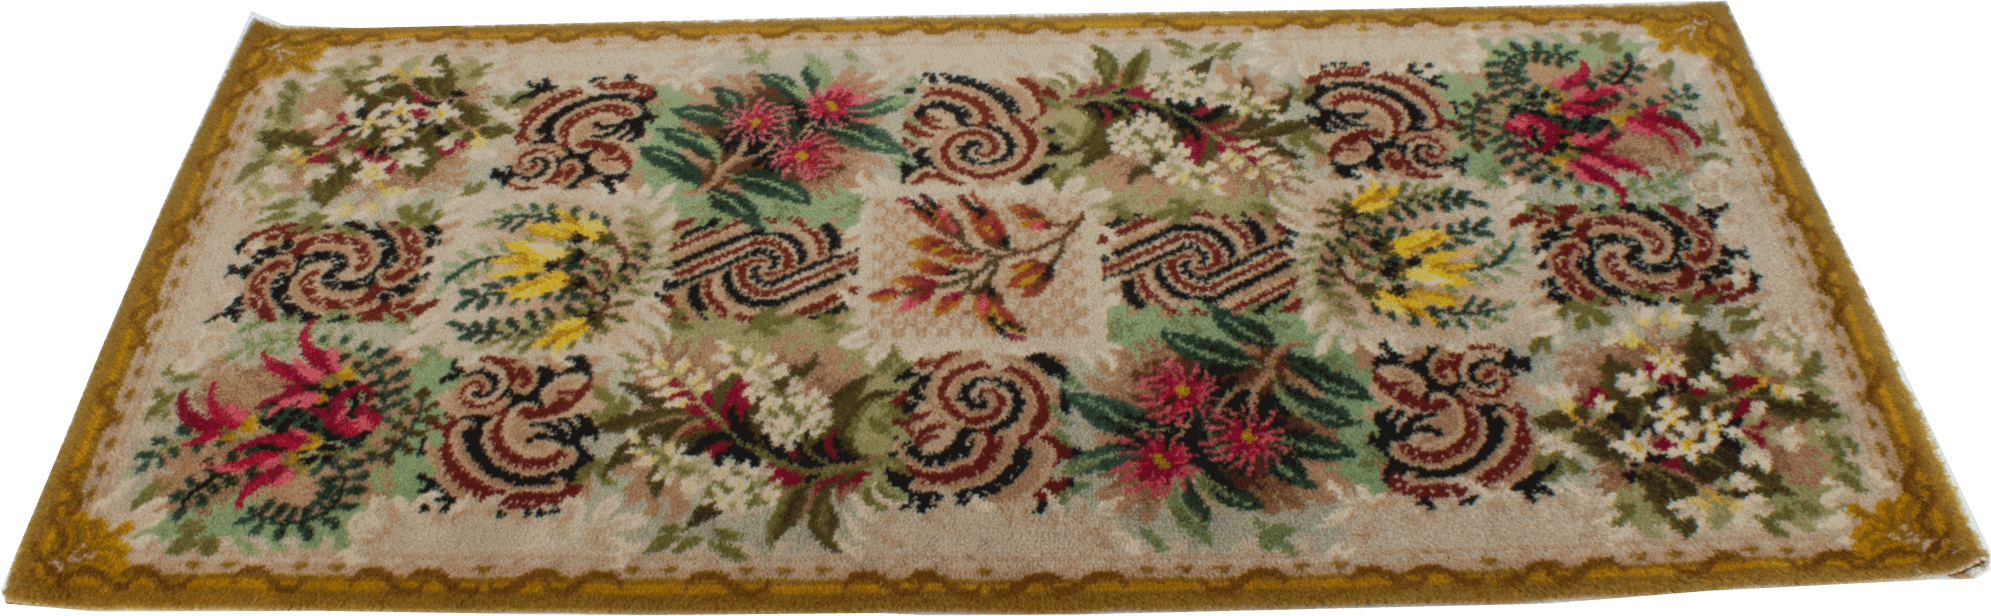 an image of a rug